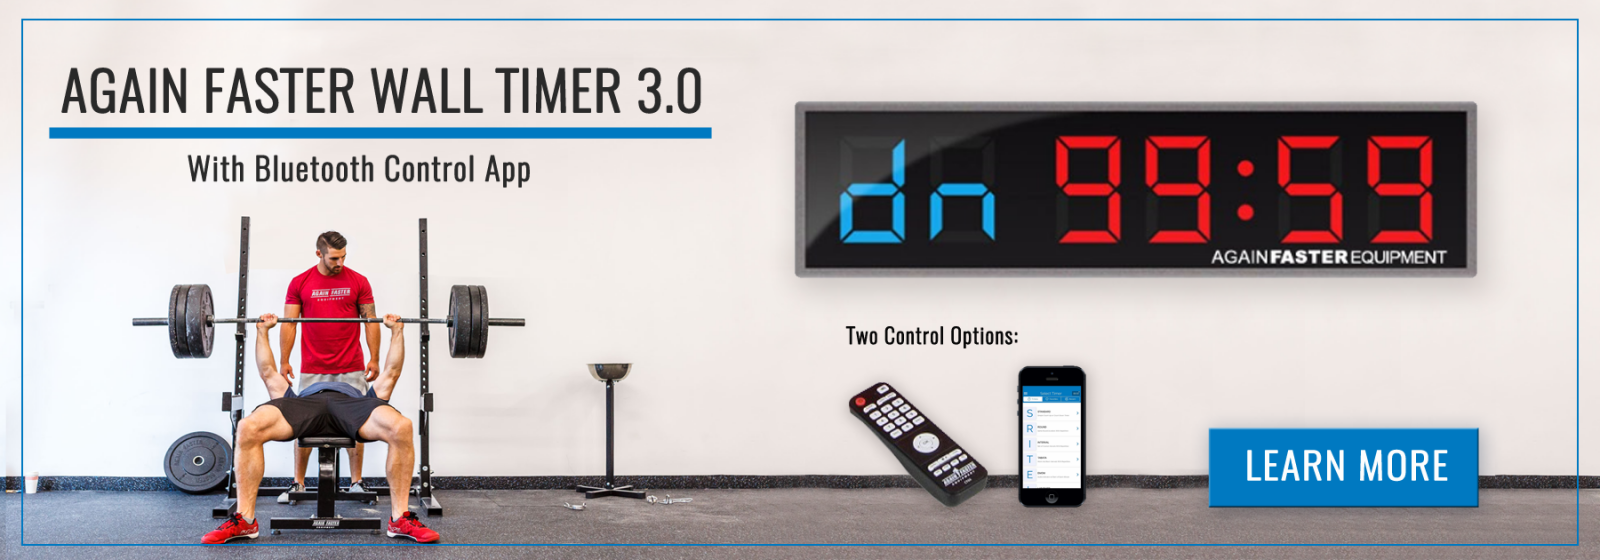 NEW Again Faster Wall Timer 3.0 banner